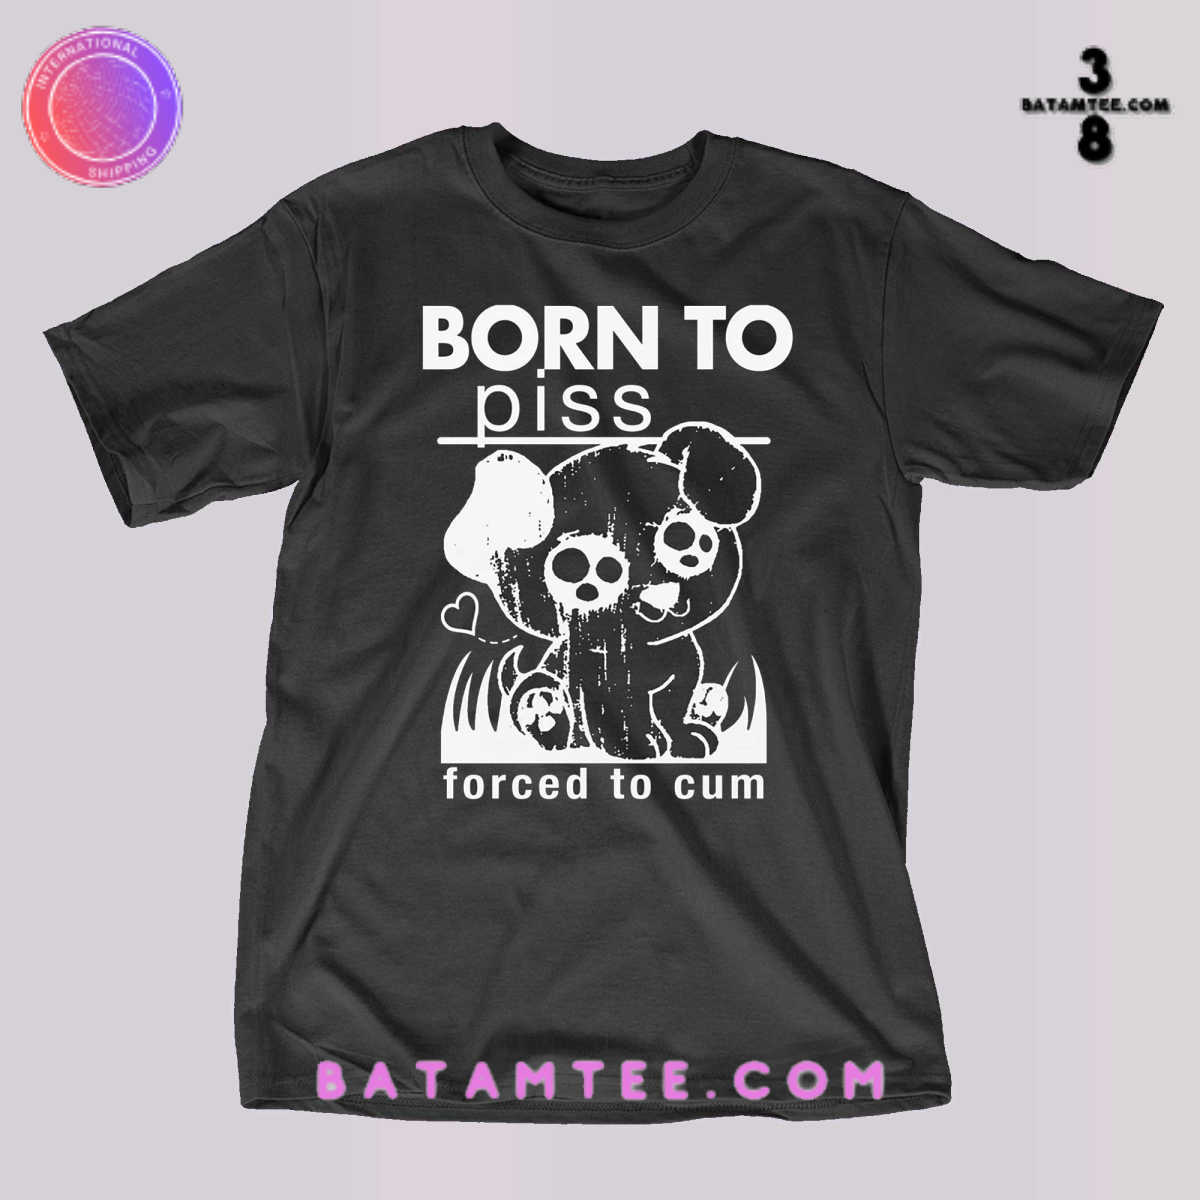 New product from Batamtee on 16/10/2023 - Batamtee Shop - Threads & Totes: Your Style Destination